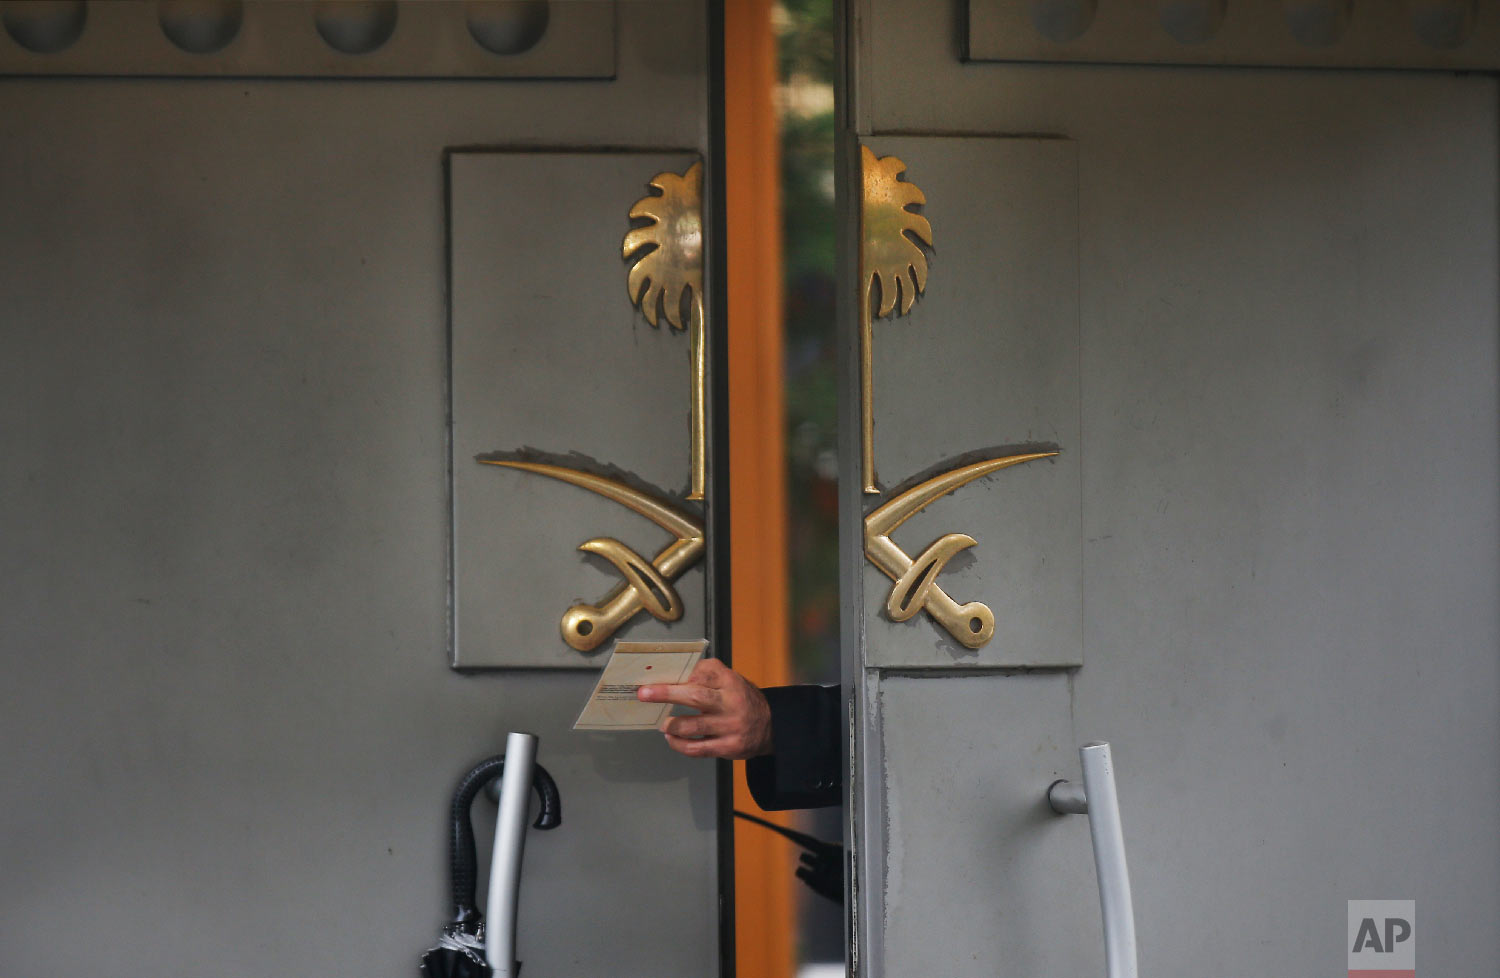  A security guard passes a document to a colleague outside Saudi Arabia's Consulate in Istanbul on Oct. 15, 2018, nearly two weeks after Saudi journalist Jamal Khashoggi was killed at the consulate. (AP Photo/Petros Giannakouris) 